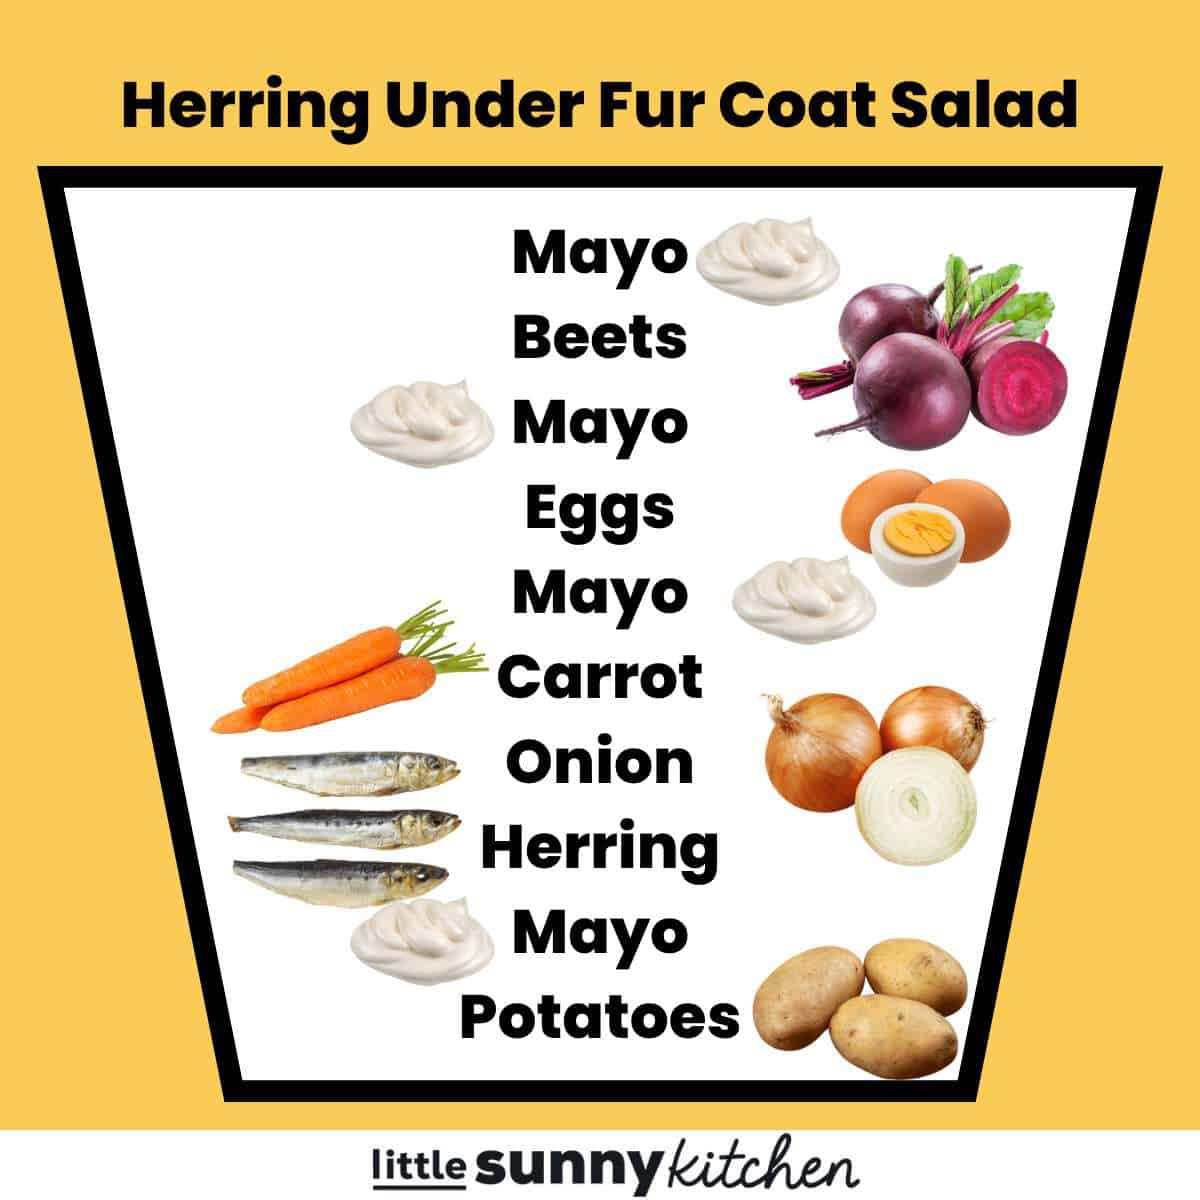 A graphic showing the layers of the herring under fur coat salad